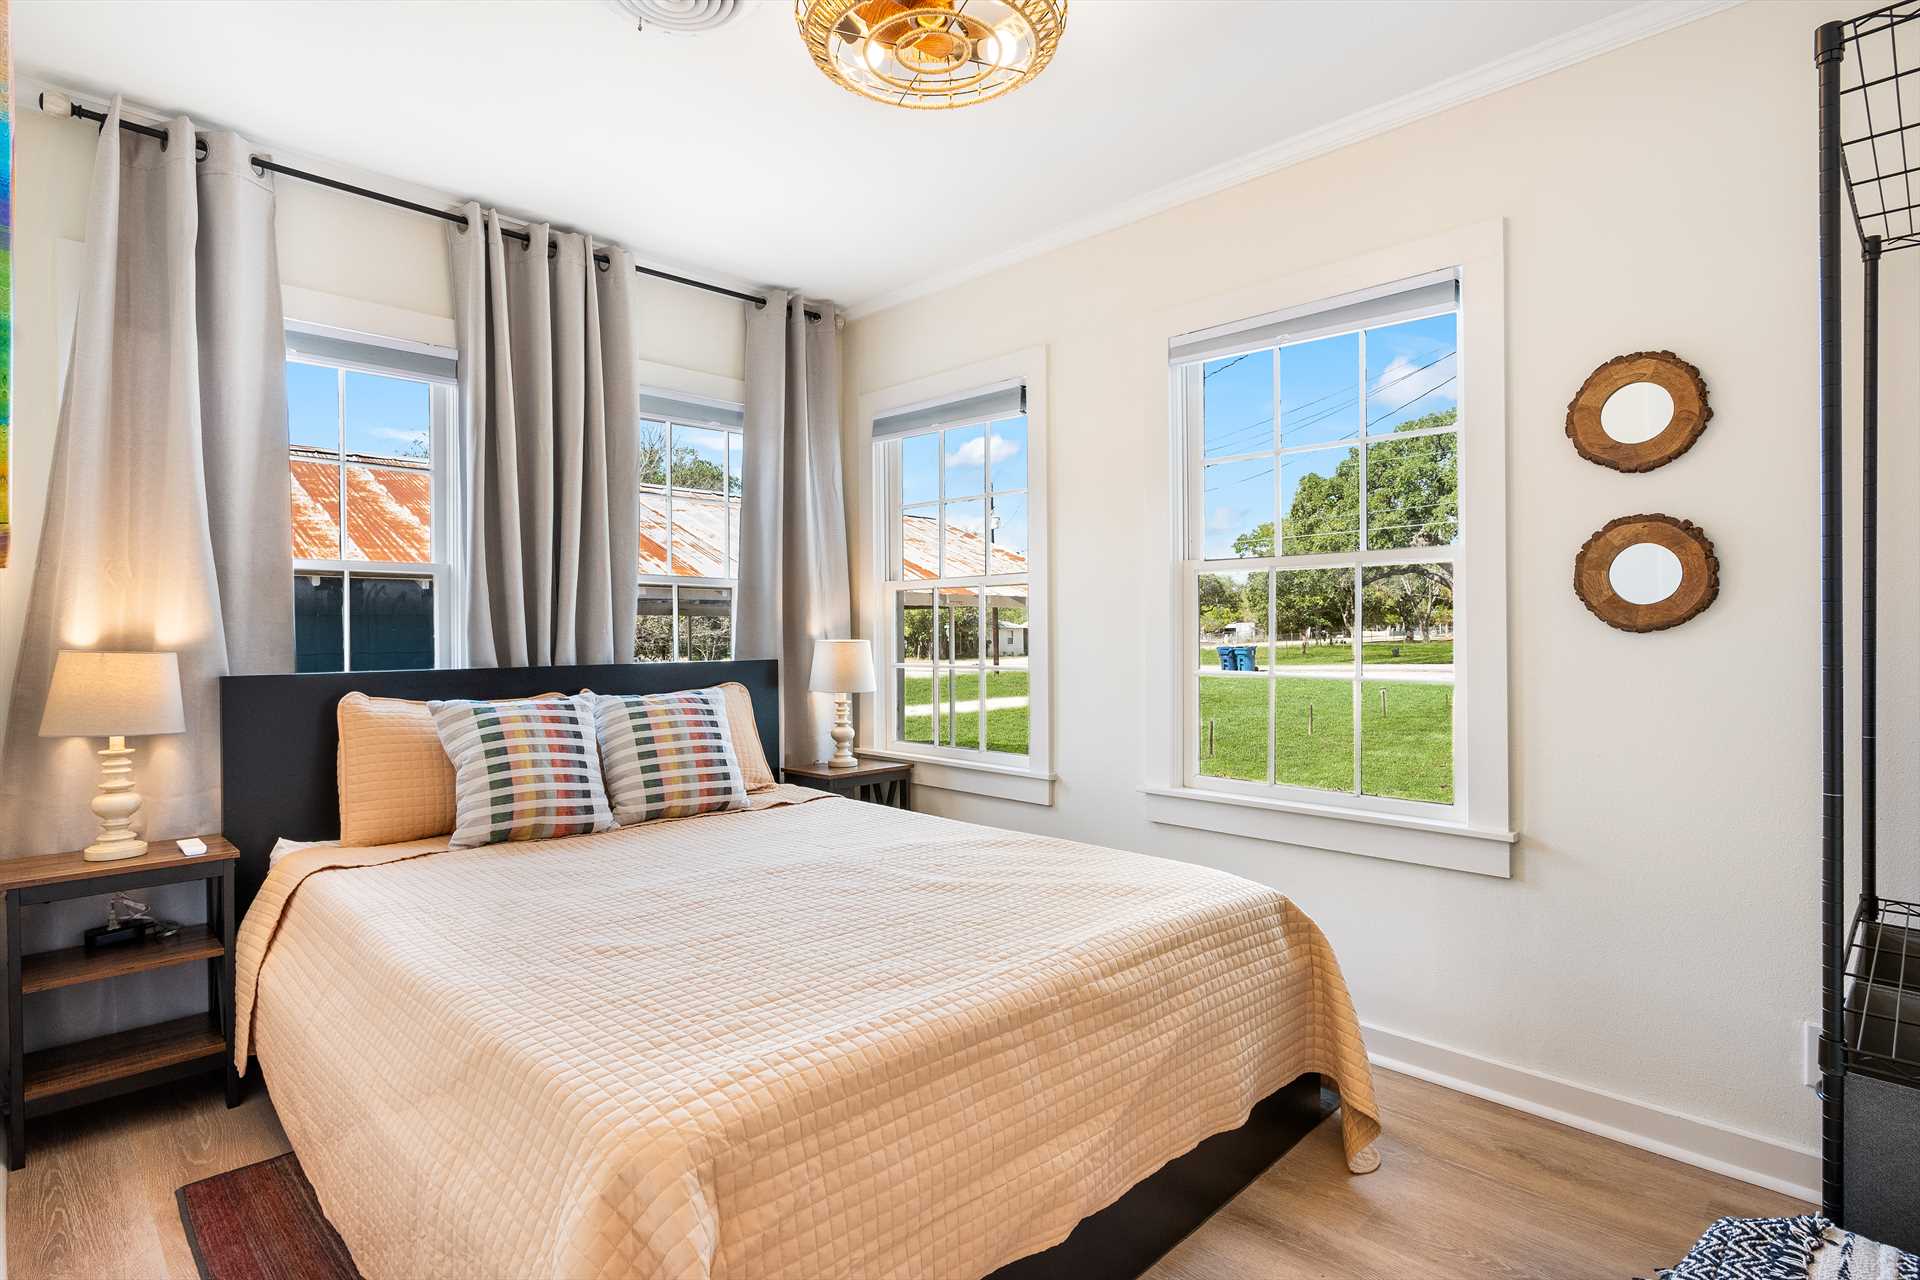                                                 Lots of natural light pours into the second bedroom, and there's sweet slumber for two on its queen-sized bed!